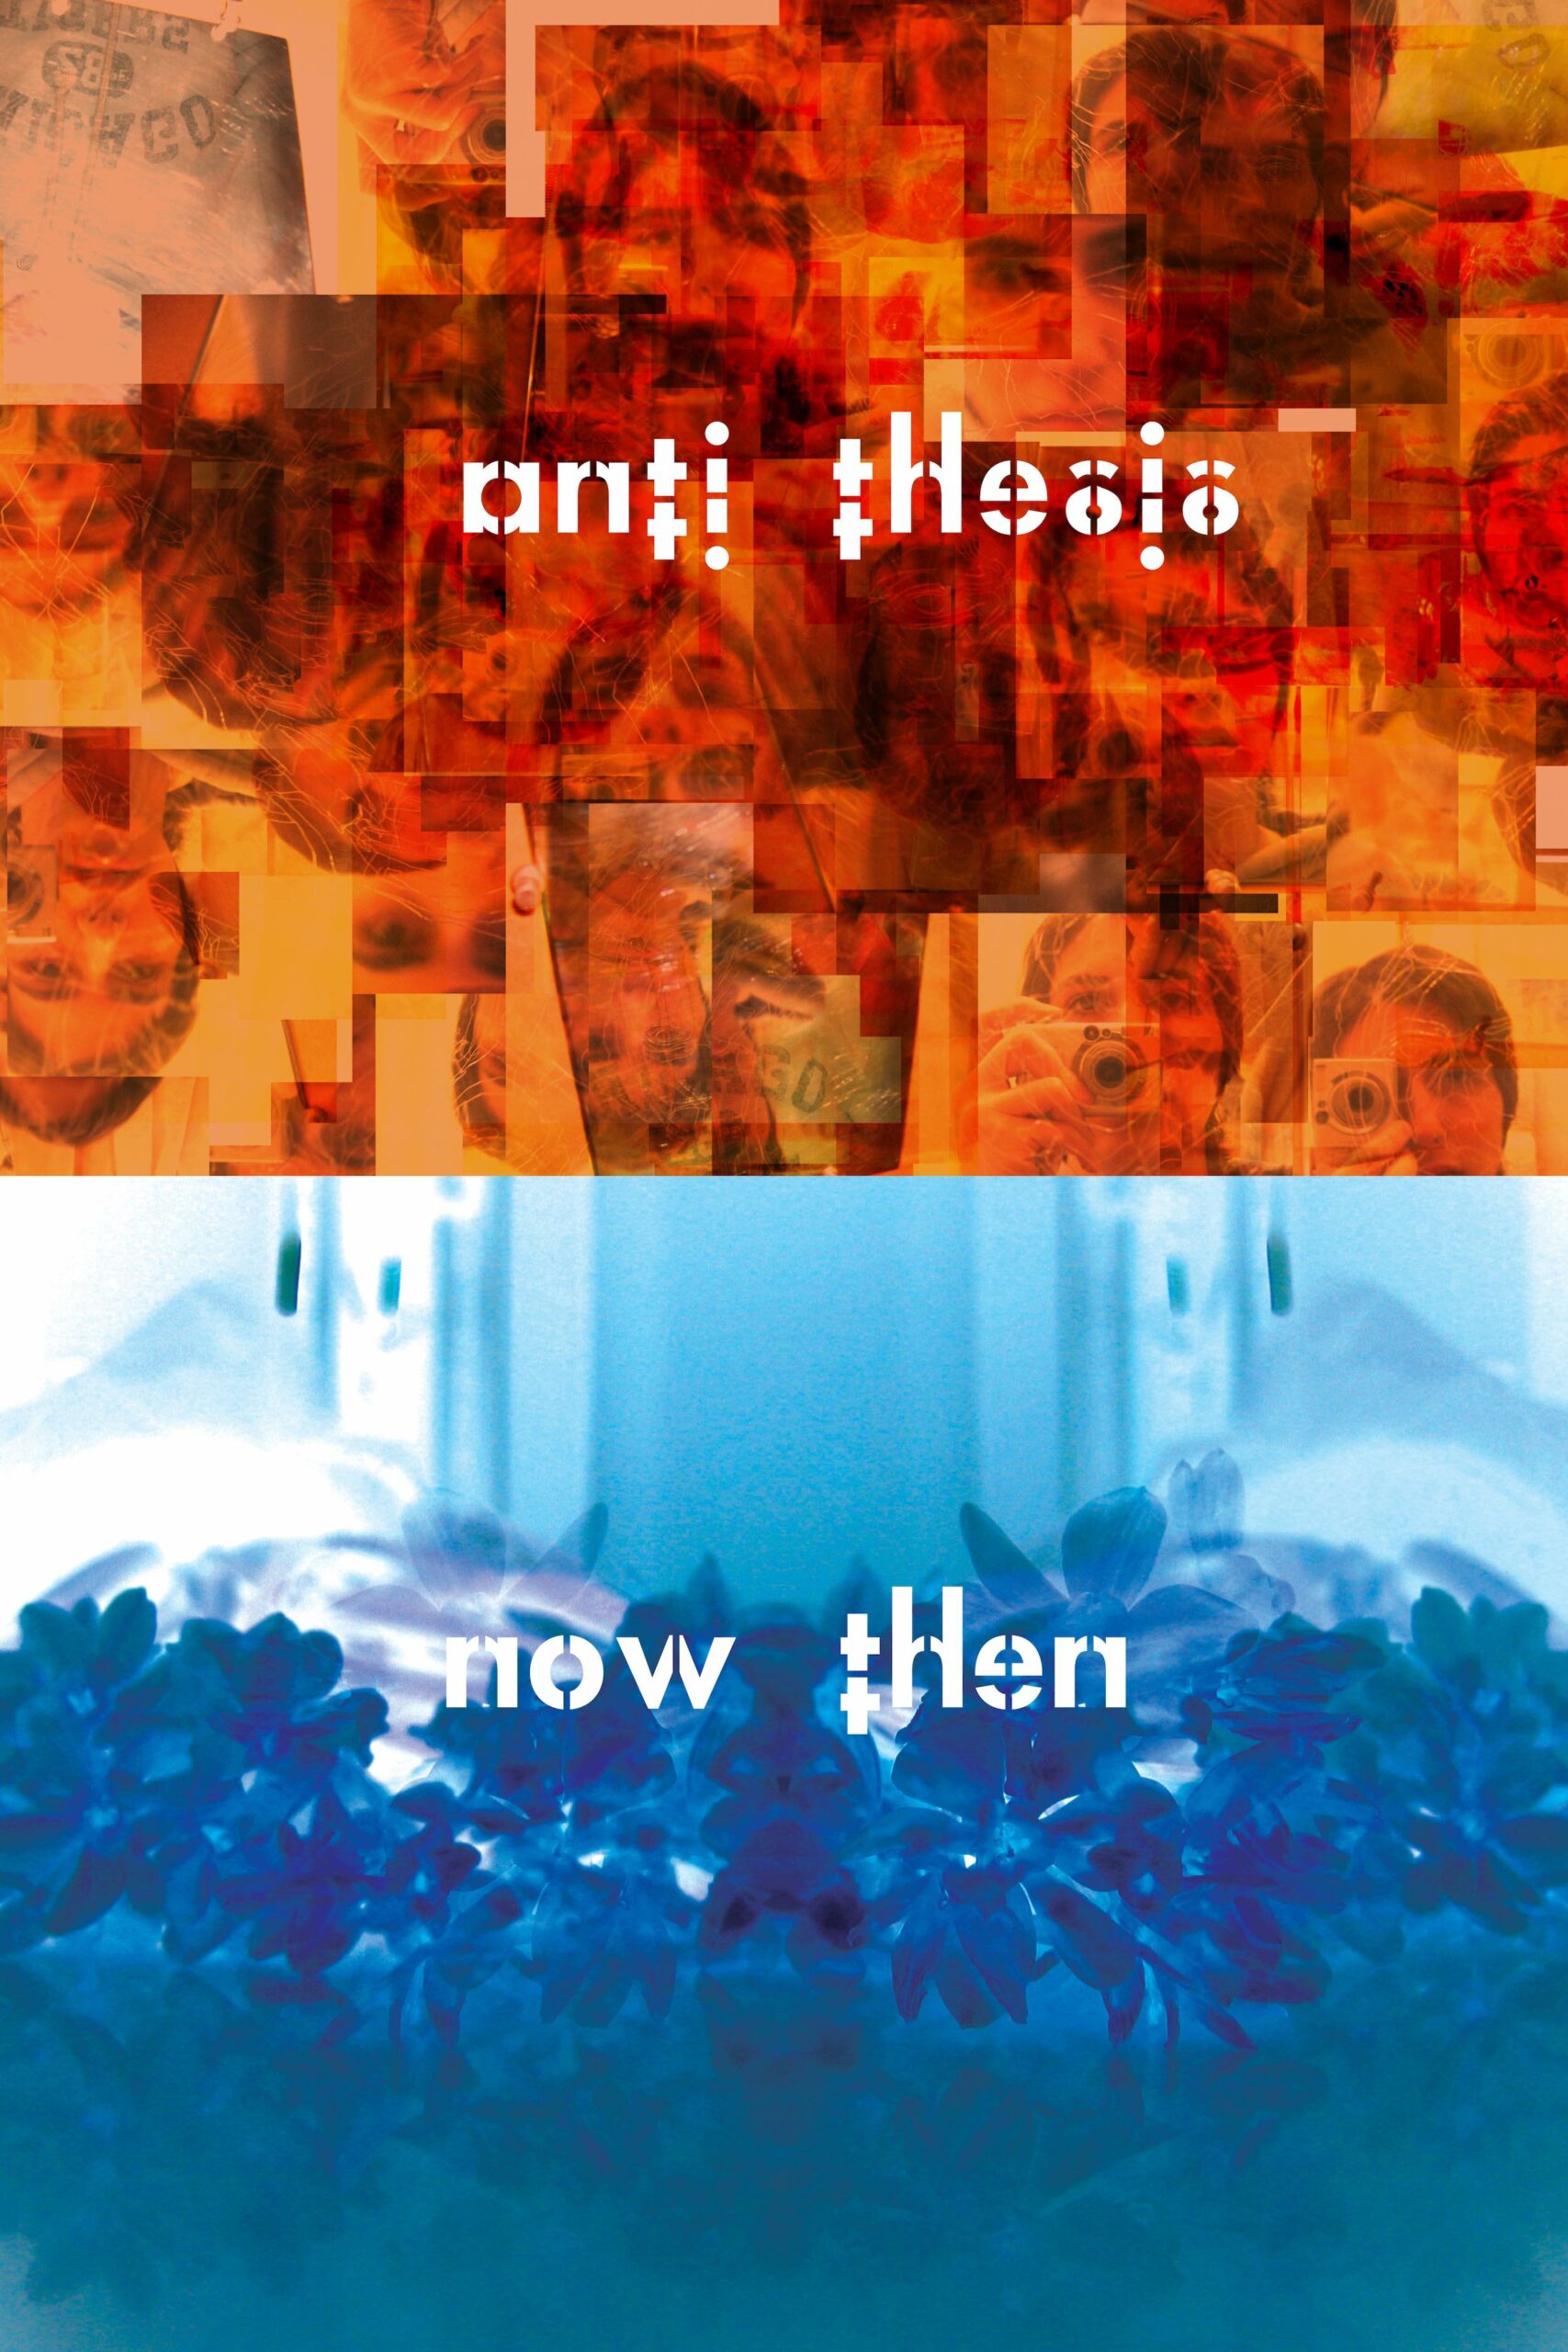 “anti | thesis” against orange field, “now | then” on blue